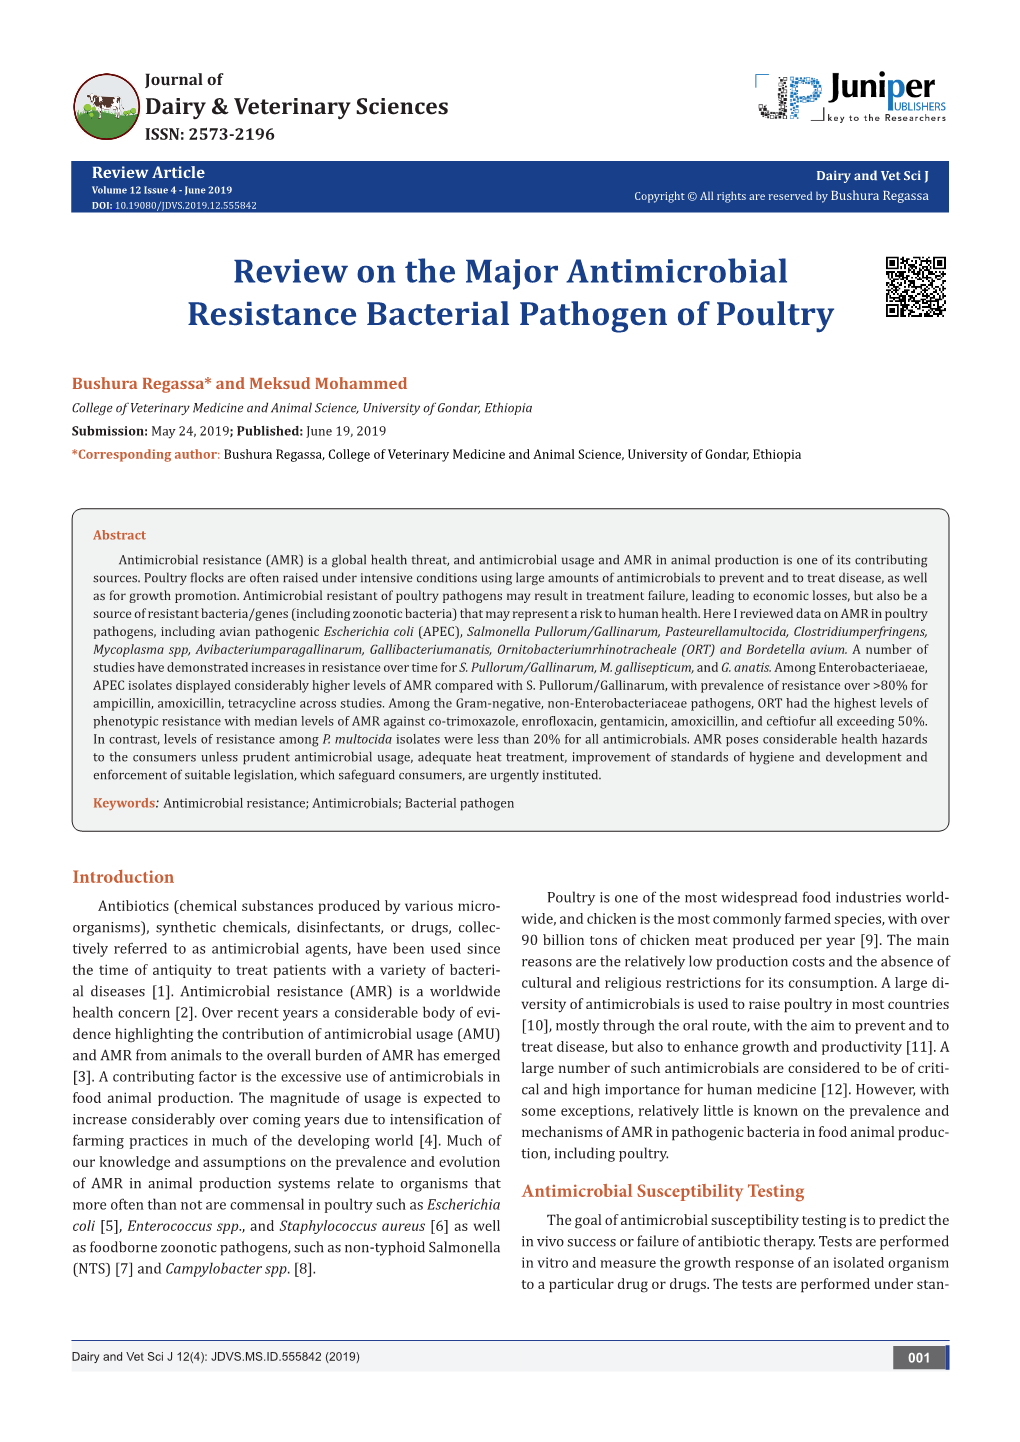 Review on the Major Antimicrobial Resistance Bacterial Pathogen of Poultry